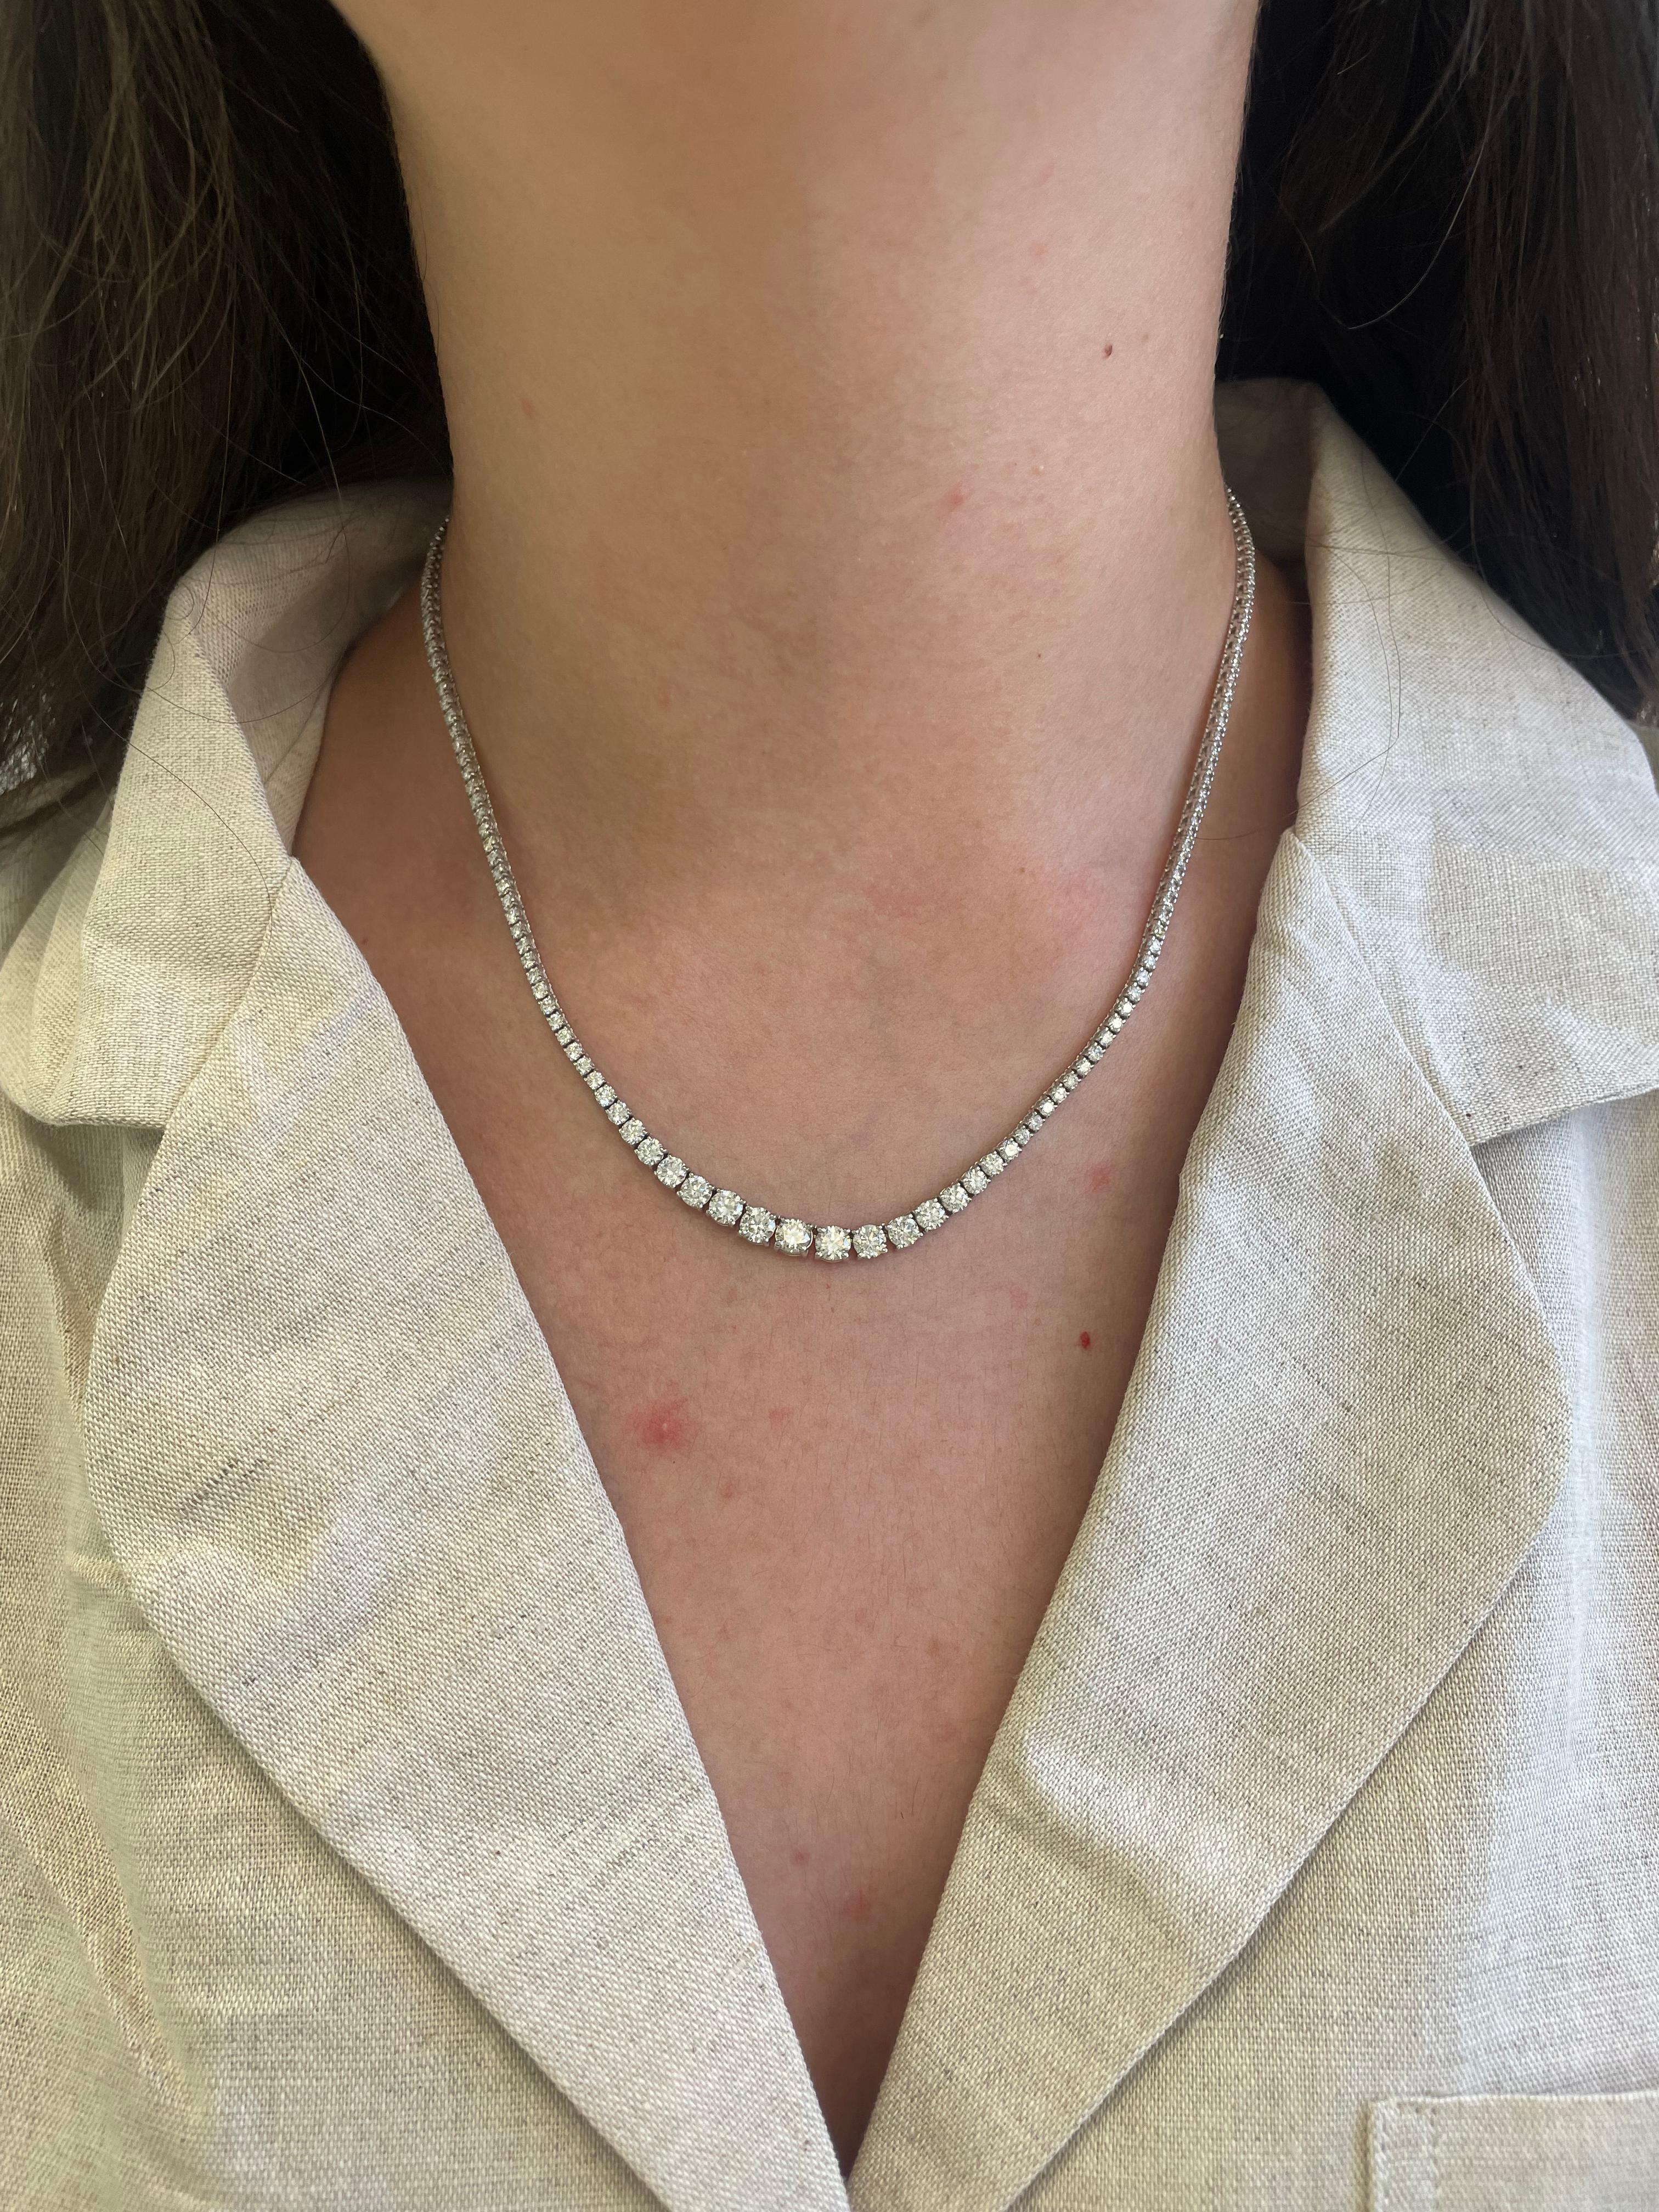 Beautiful and classic diamond tennis riviera necklace, by Alexander Beverly Hills.
167 round brilliant diamonds, 7.65 carats. Approximately G-I color and VS clarity. 18k white gold, 16.36 grams, 16.5n.
Accommodated with an up-to-date digital